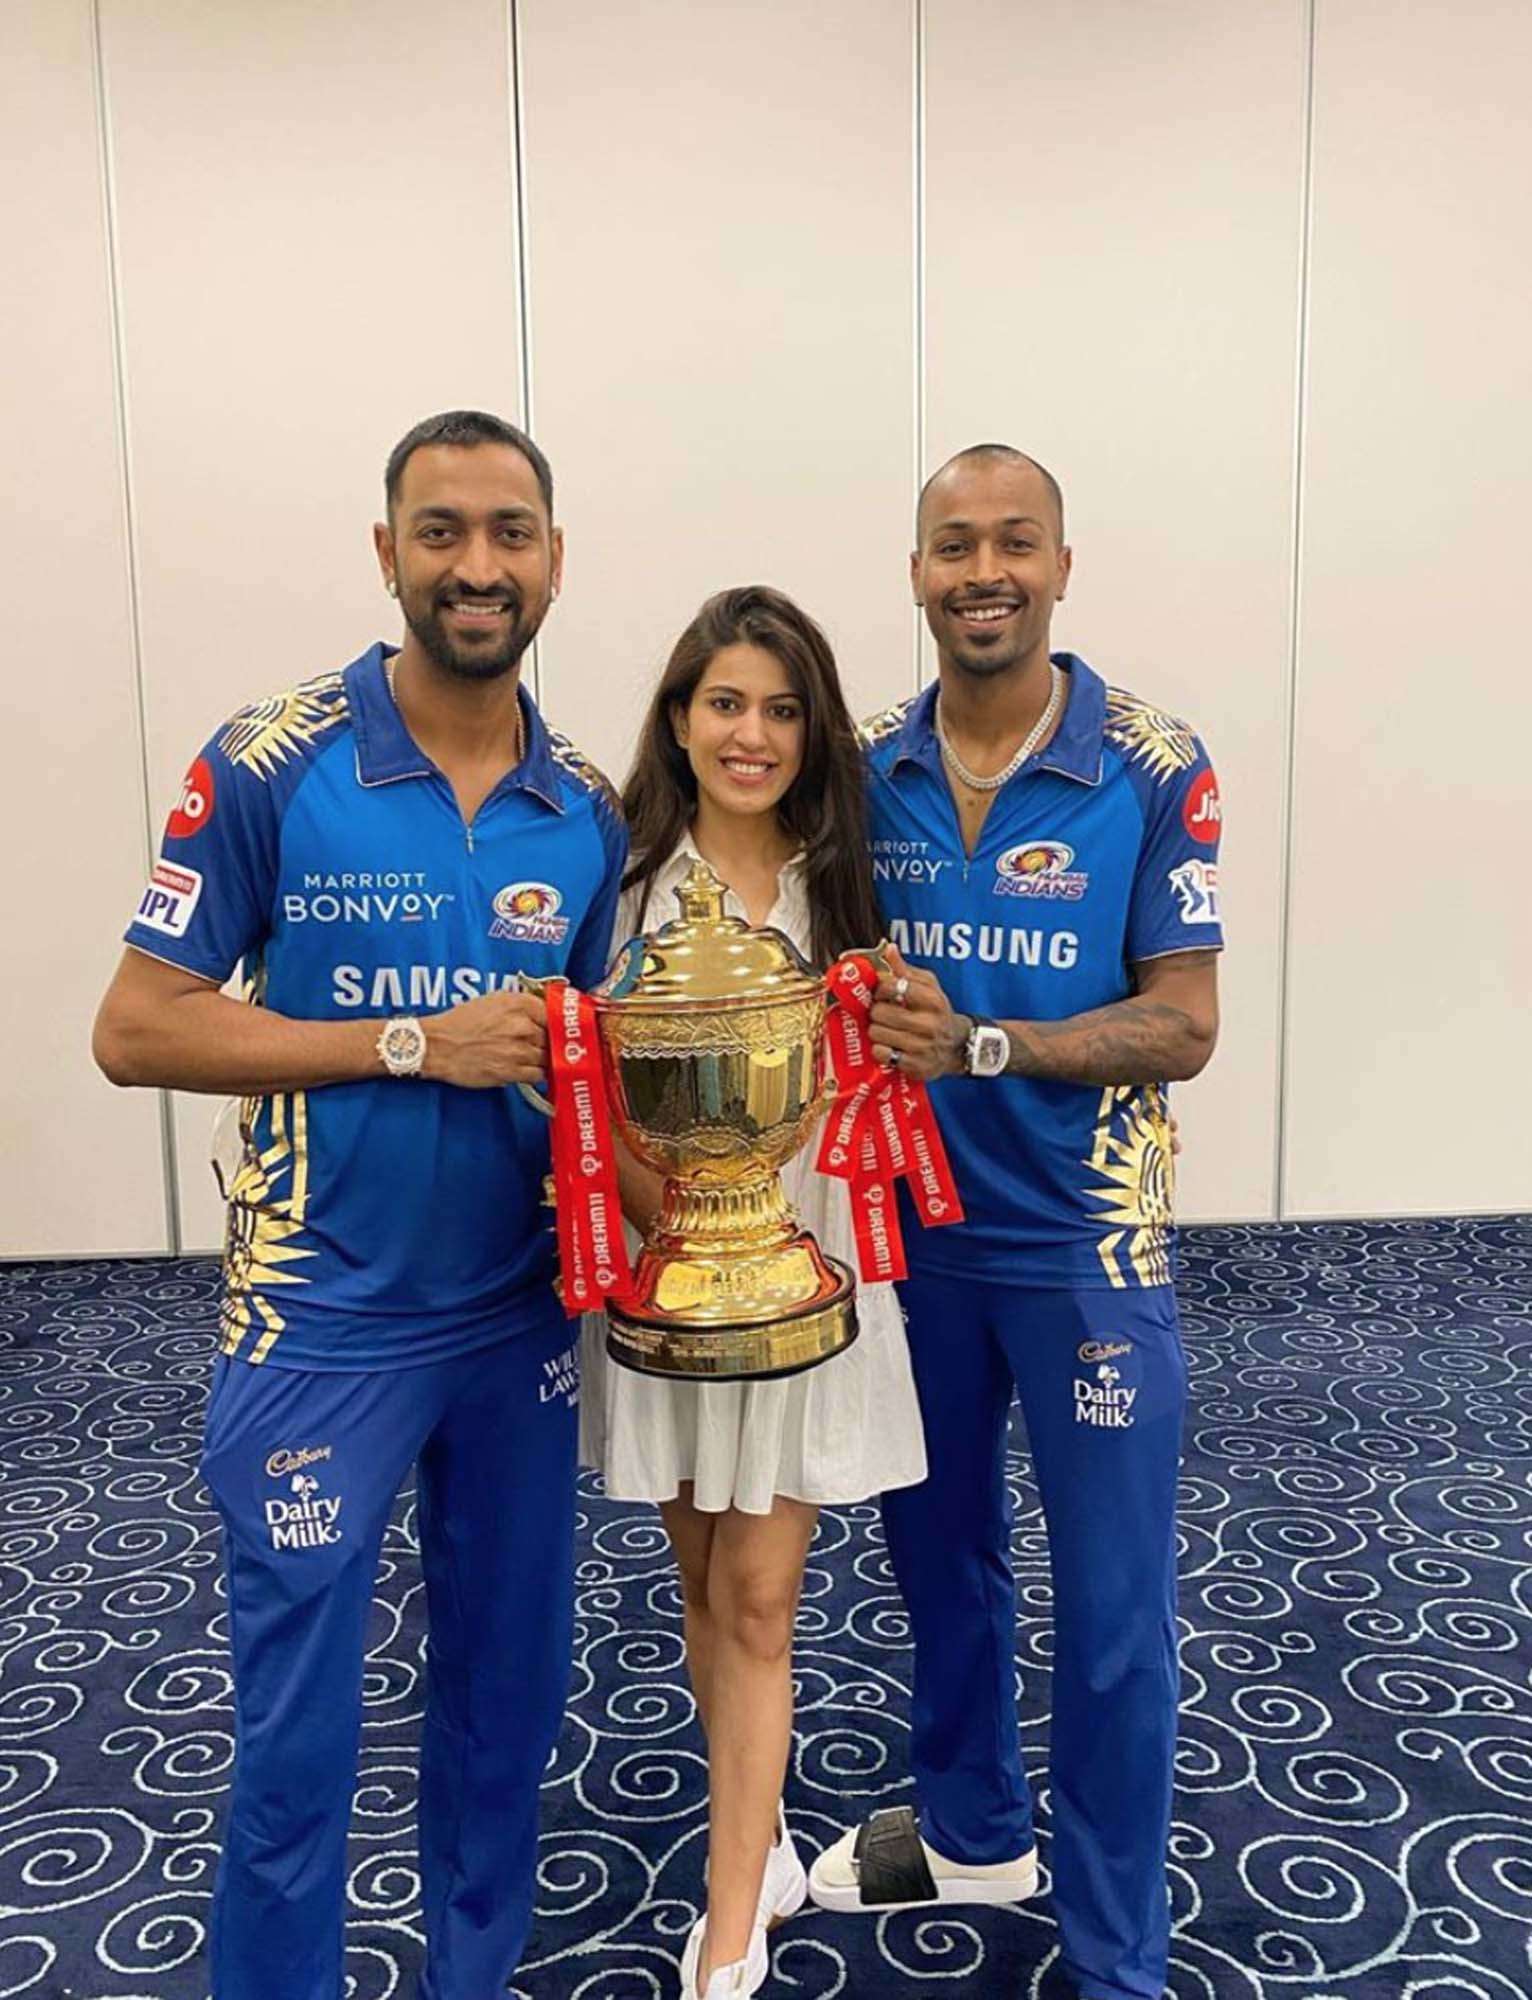 MI players celebrate 2020 IPL victory with their wives and girlfriends